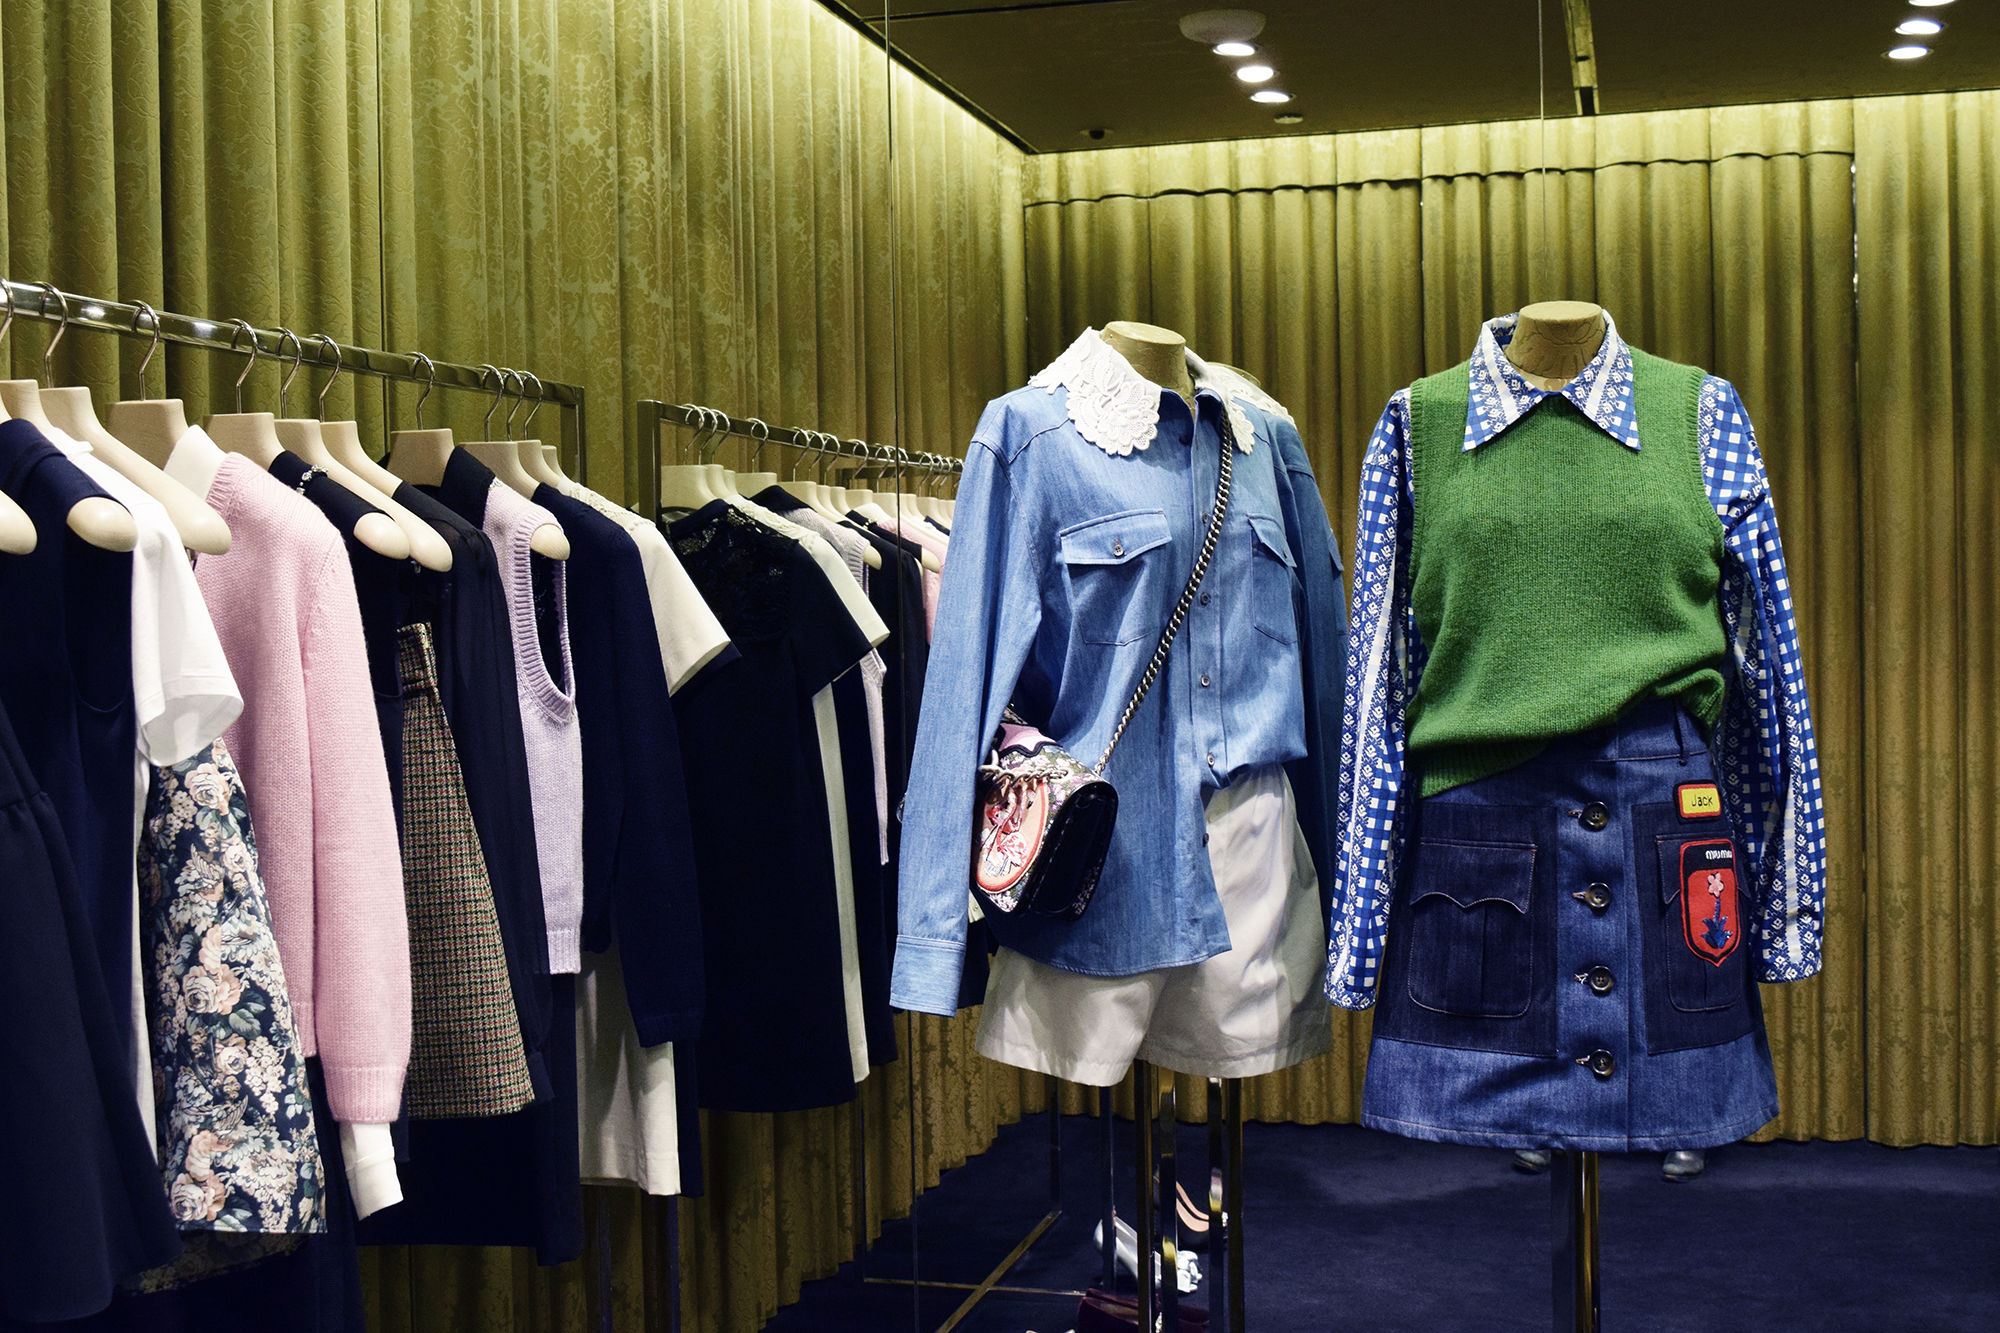 5 reasons to indulge in Marina Bay Sands' personal shopping